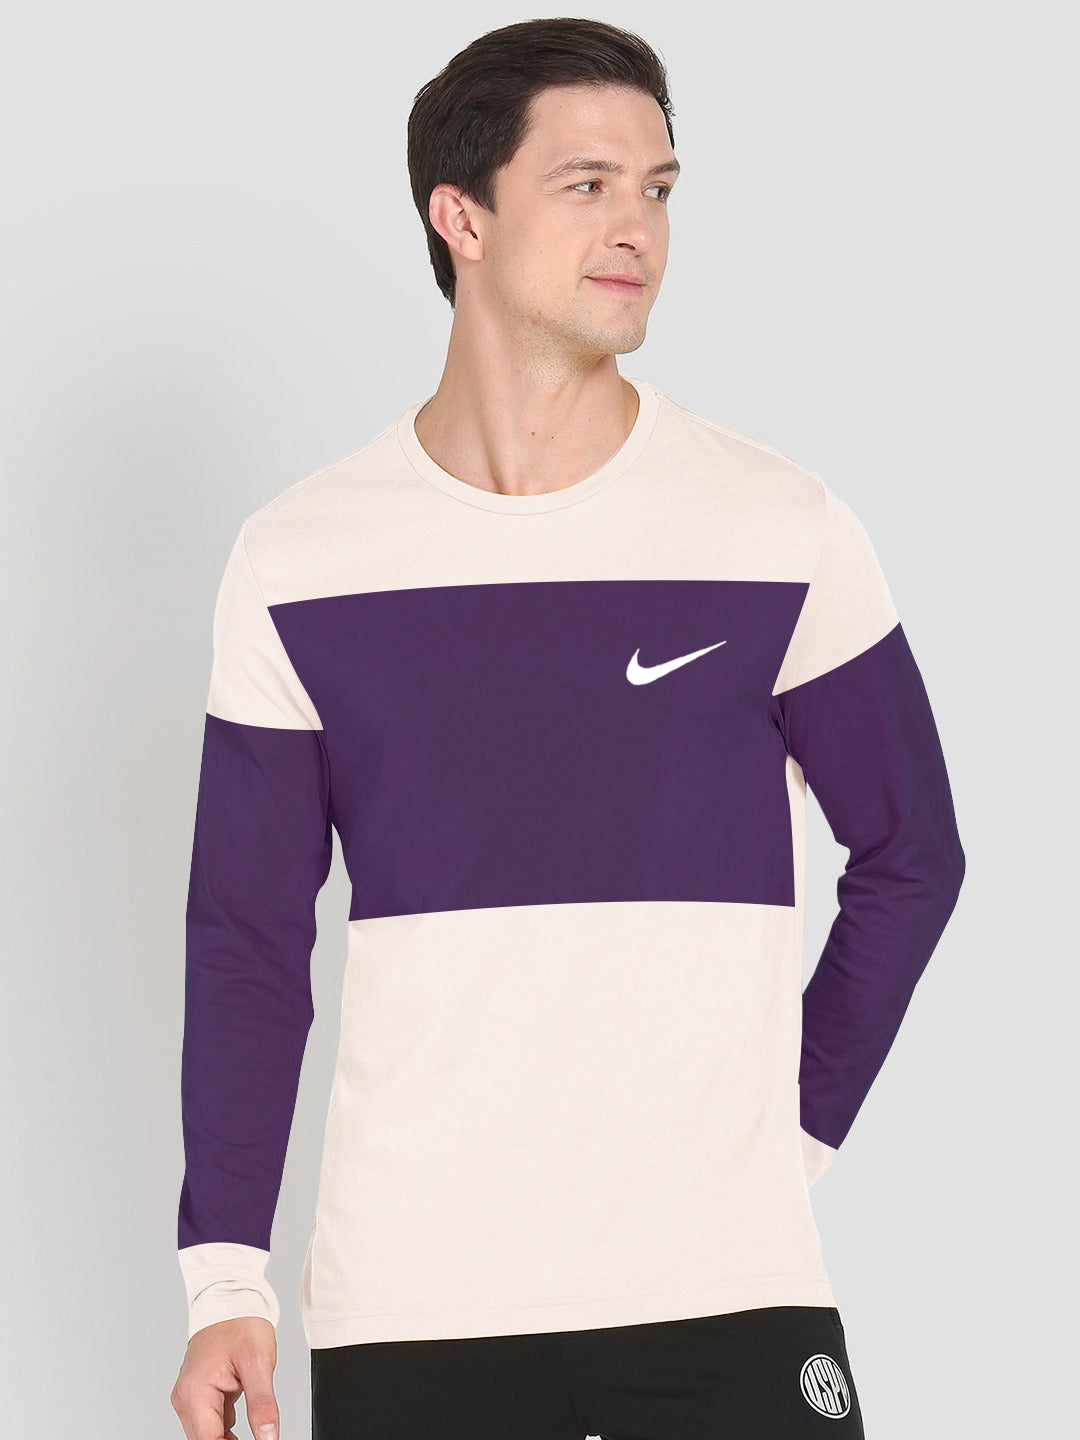 NK Crew Neck Tee Shirt For Men-Light Pink with Purple Panel-BE1221